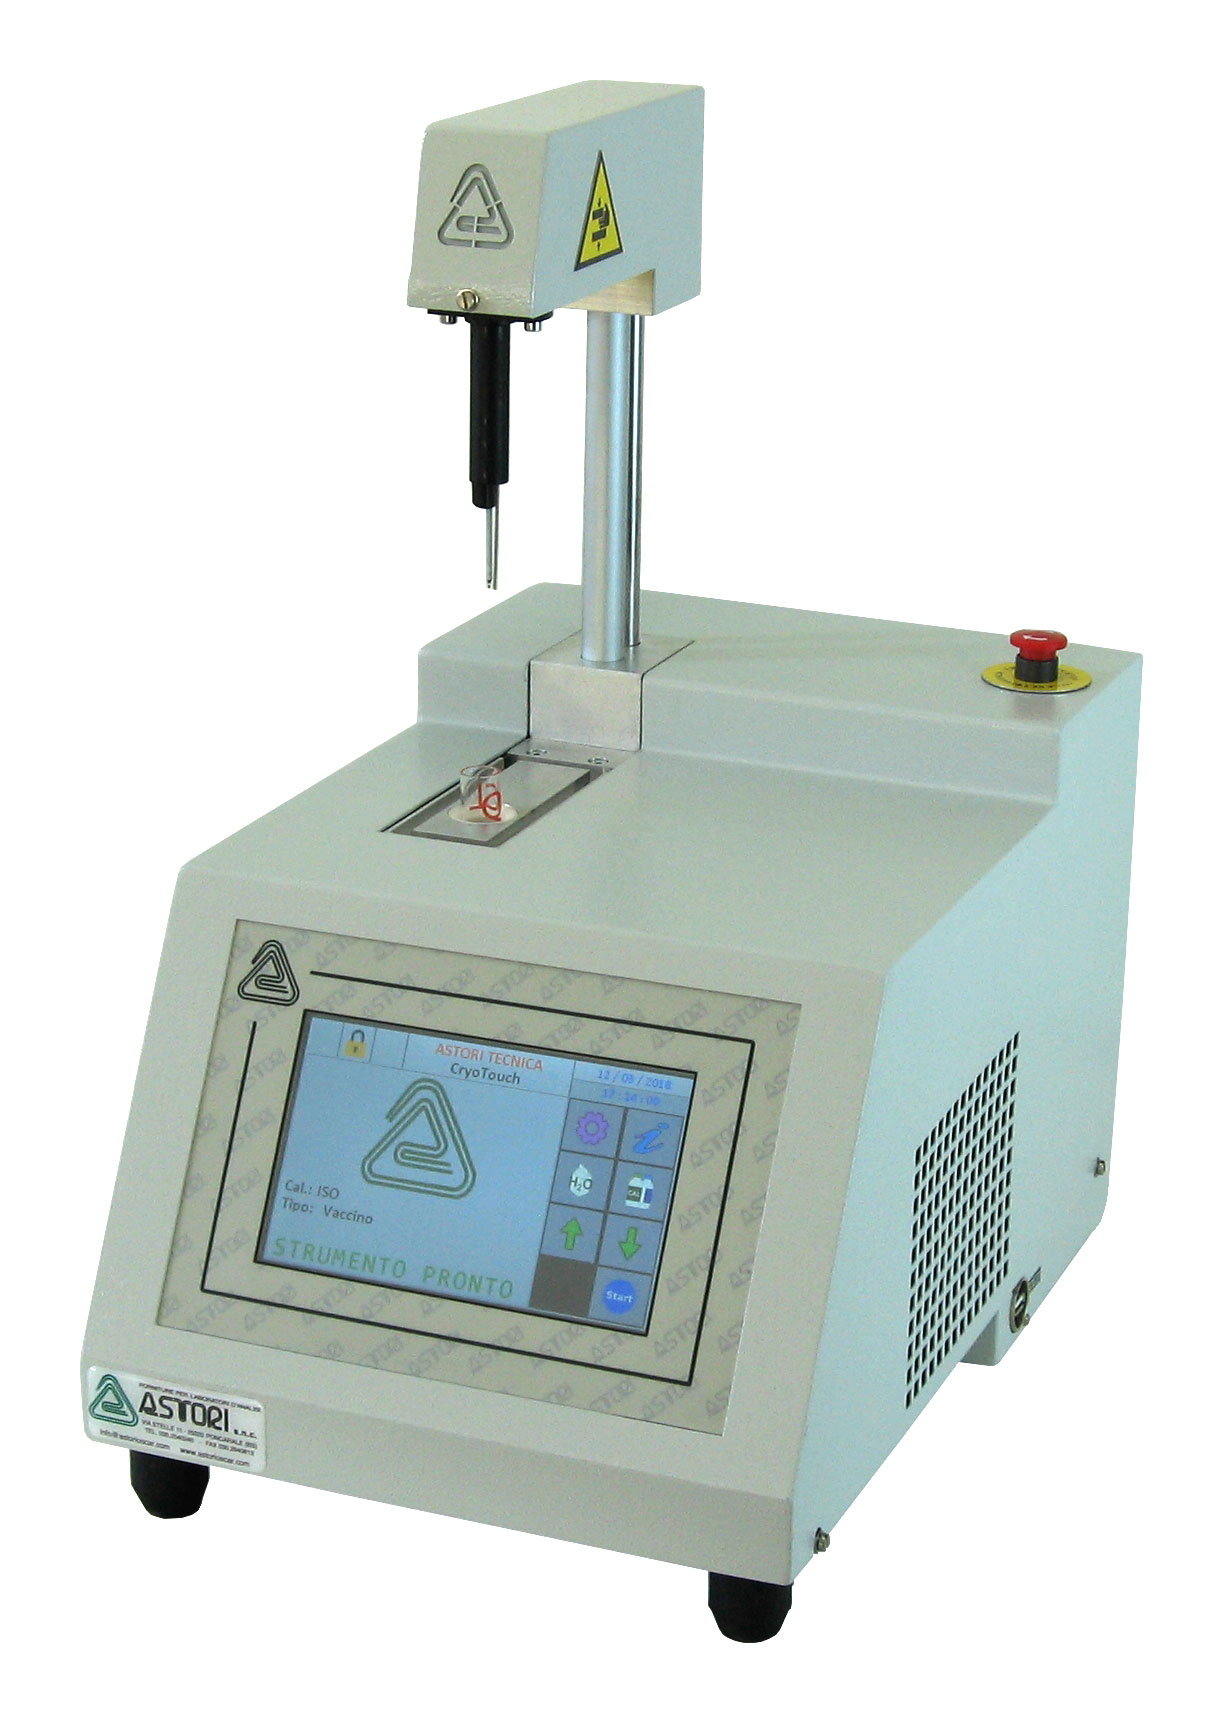 CryoTouch 1 automatic cryoscoper with ''lactose-free'' function. ASTORI TECNICA. Number of samples: 1. Sample volume (ml): 2 or 2.5. Resolution (ºC): ±0.0005. Reproducibility (ºC): ±0.0025 (bovine milk). Dim. WxHxD (mm): 285x360x485 (with head down). Weight (kg): 16.1.Supplied with a 'starter-kit' including a box of glass sample tubes, a tube-holder, 3 calibration standards and a cooling liquid bottle.